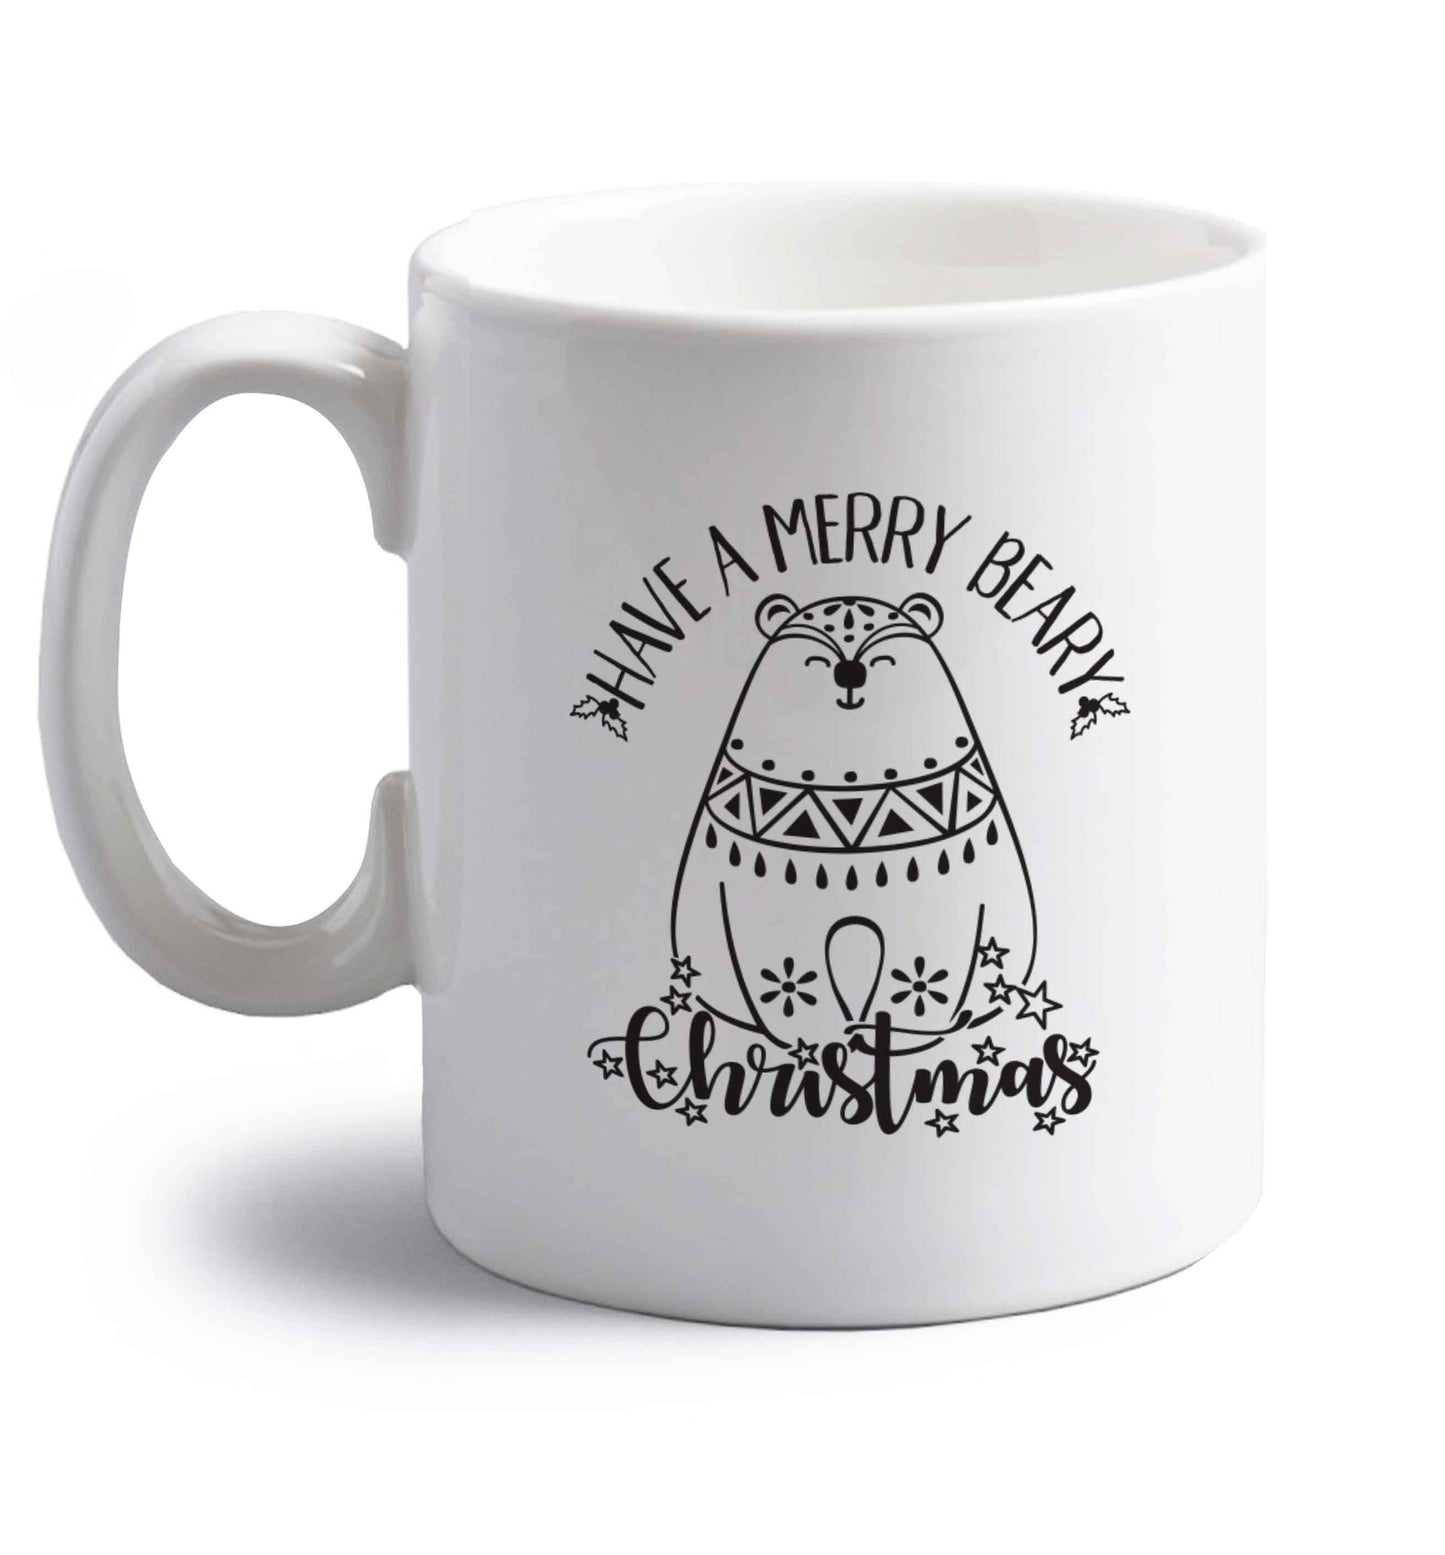 Have a merry beary Christmas right handed white ceramic mug 